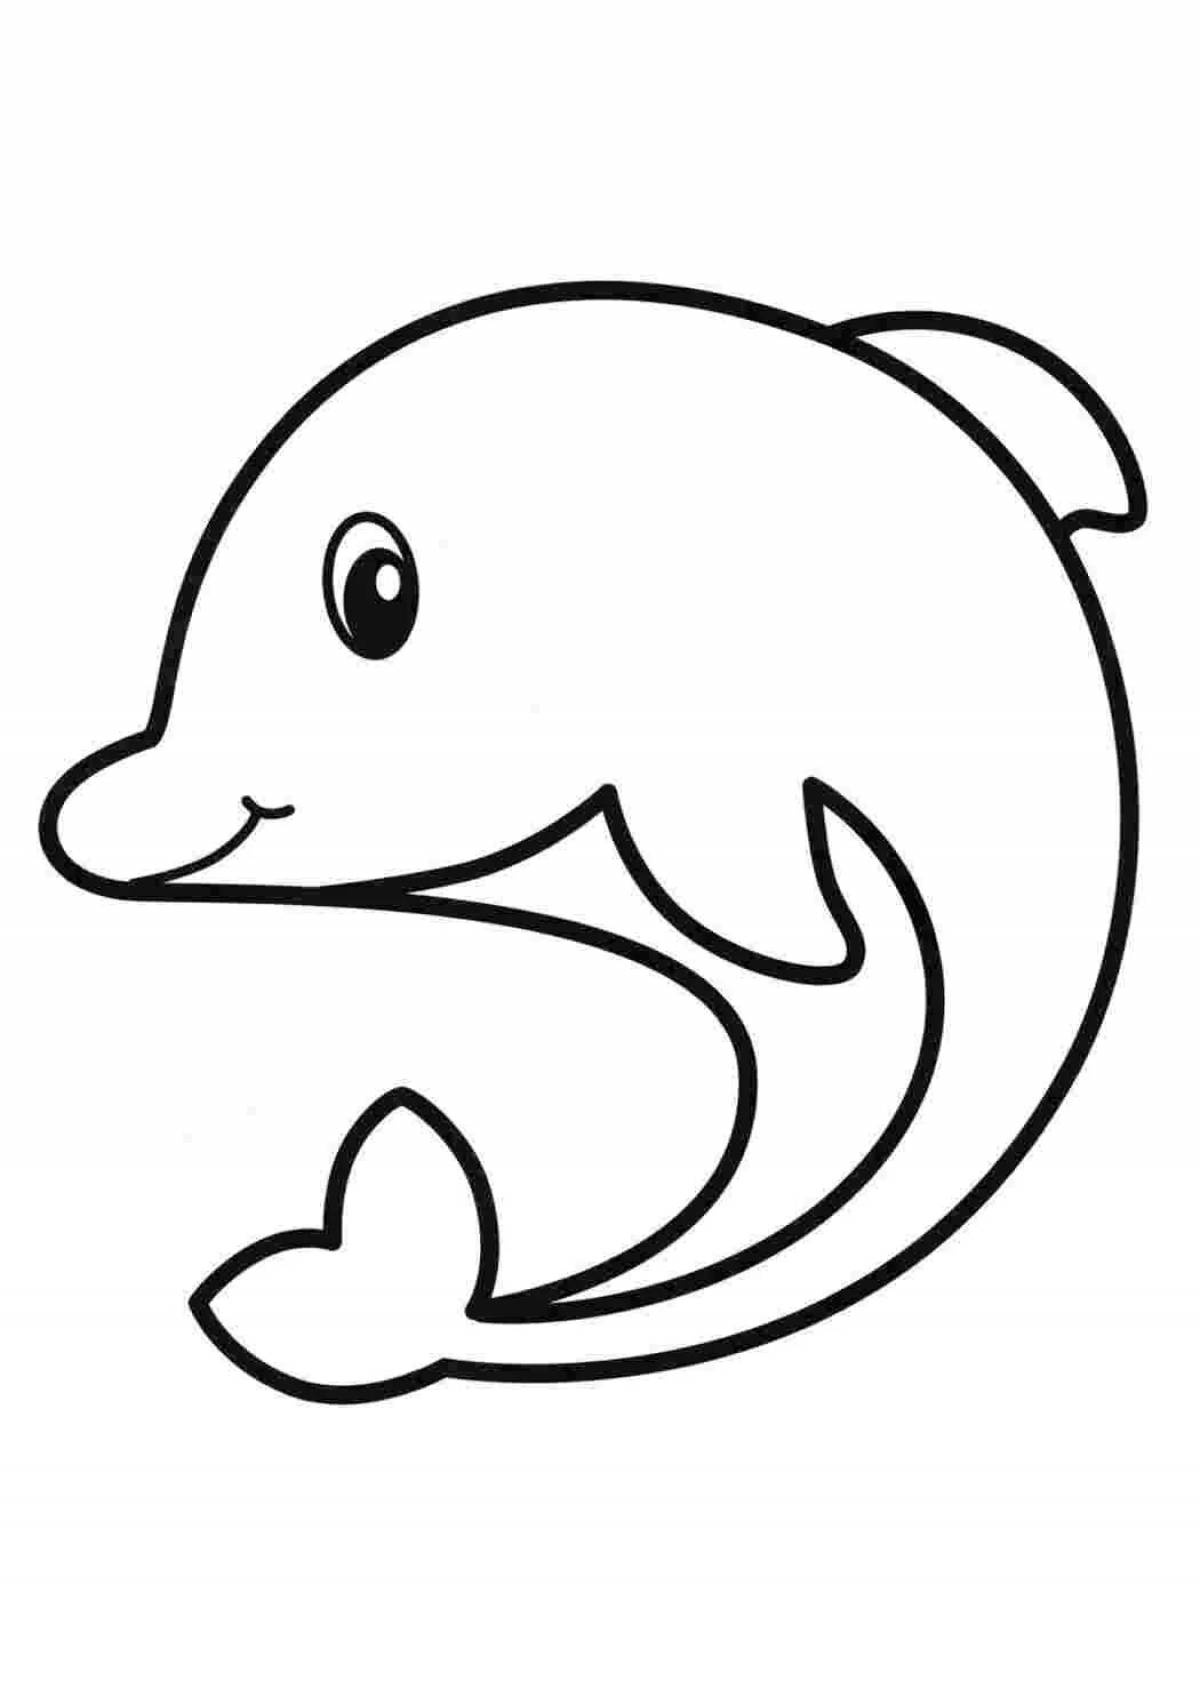 Dolphin for kids #10